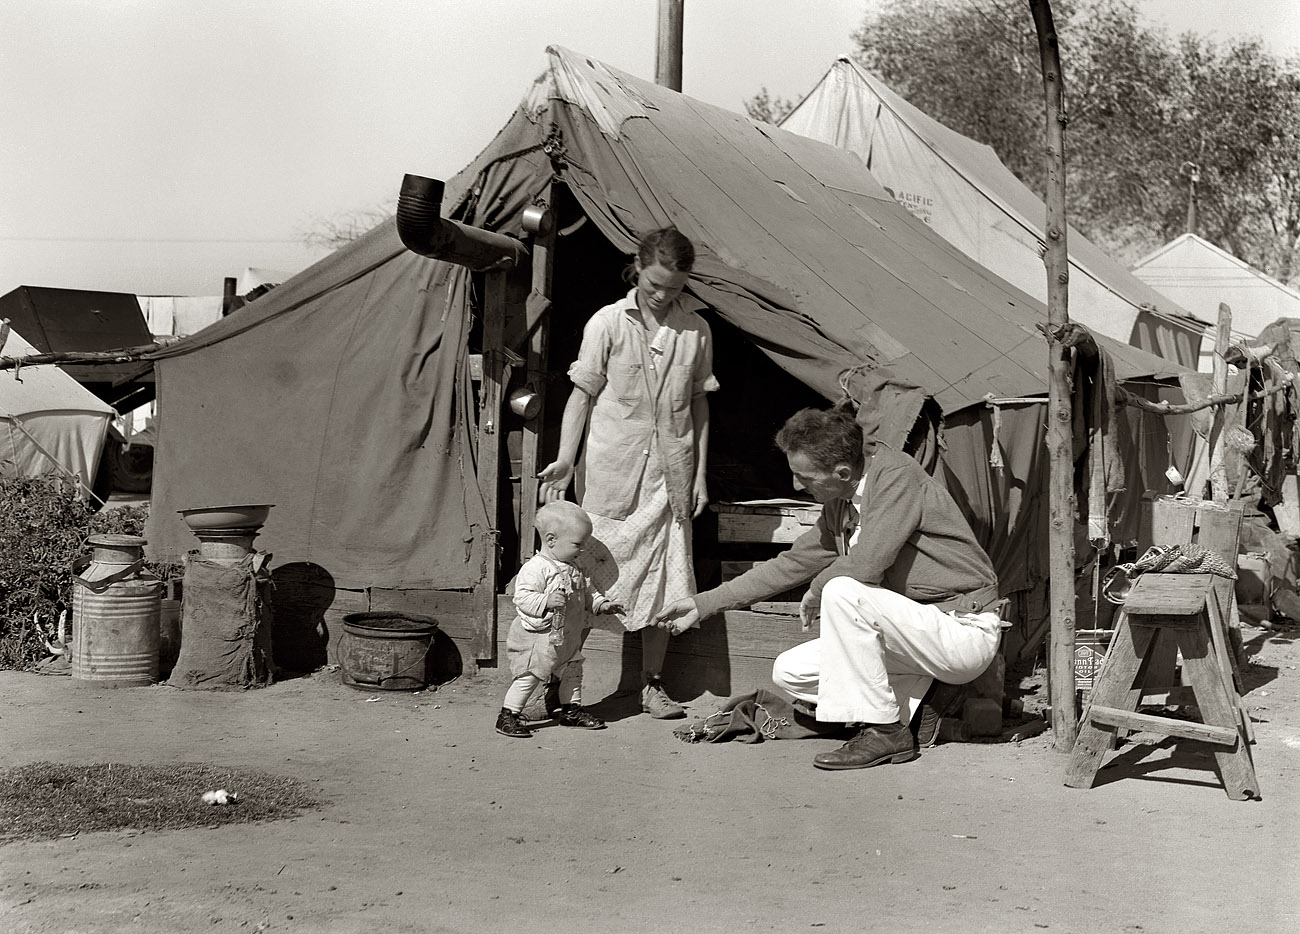 November 1936. Arvin migratory farm workers' camp in Kern County, California. "Tom Collins, manager of Kern migrant camp, with drought refugee family."  Medium-format nitrate negative by Dorothea Lange. View full size.